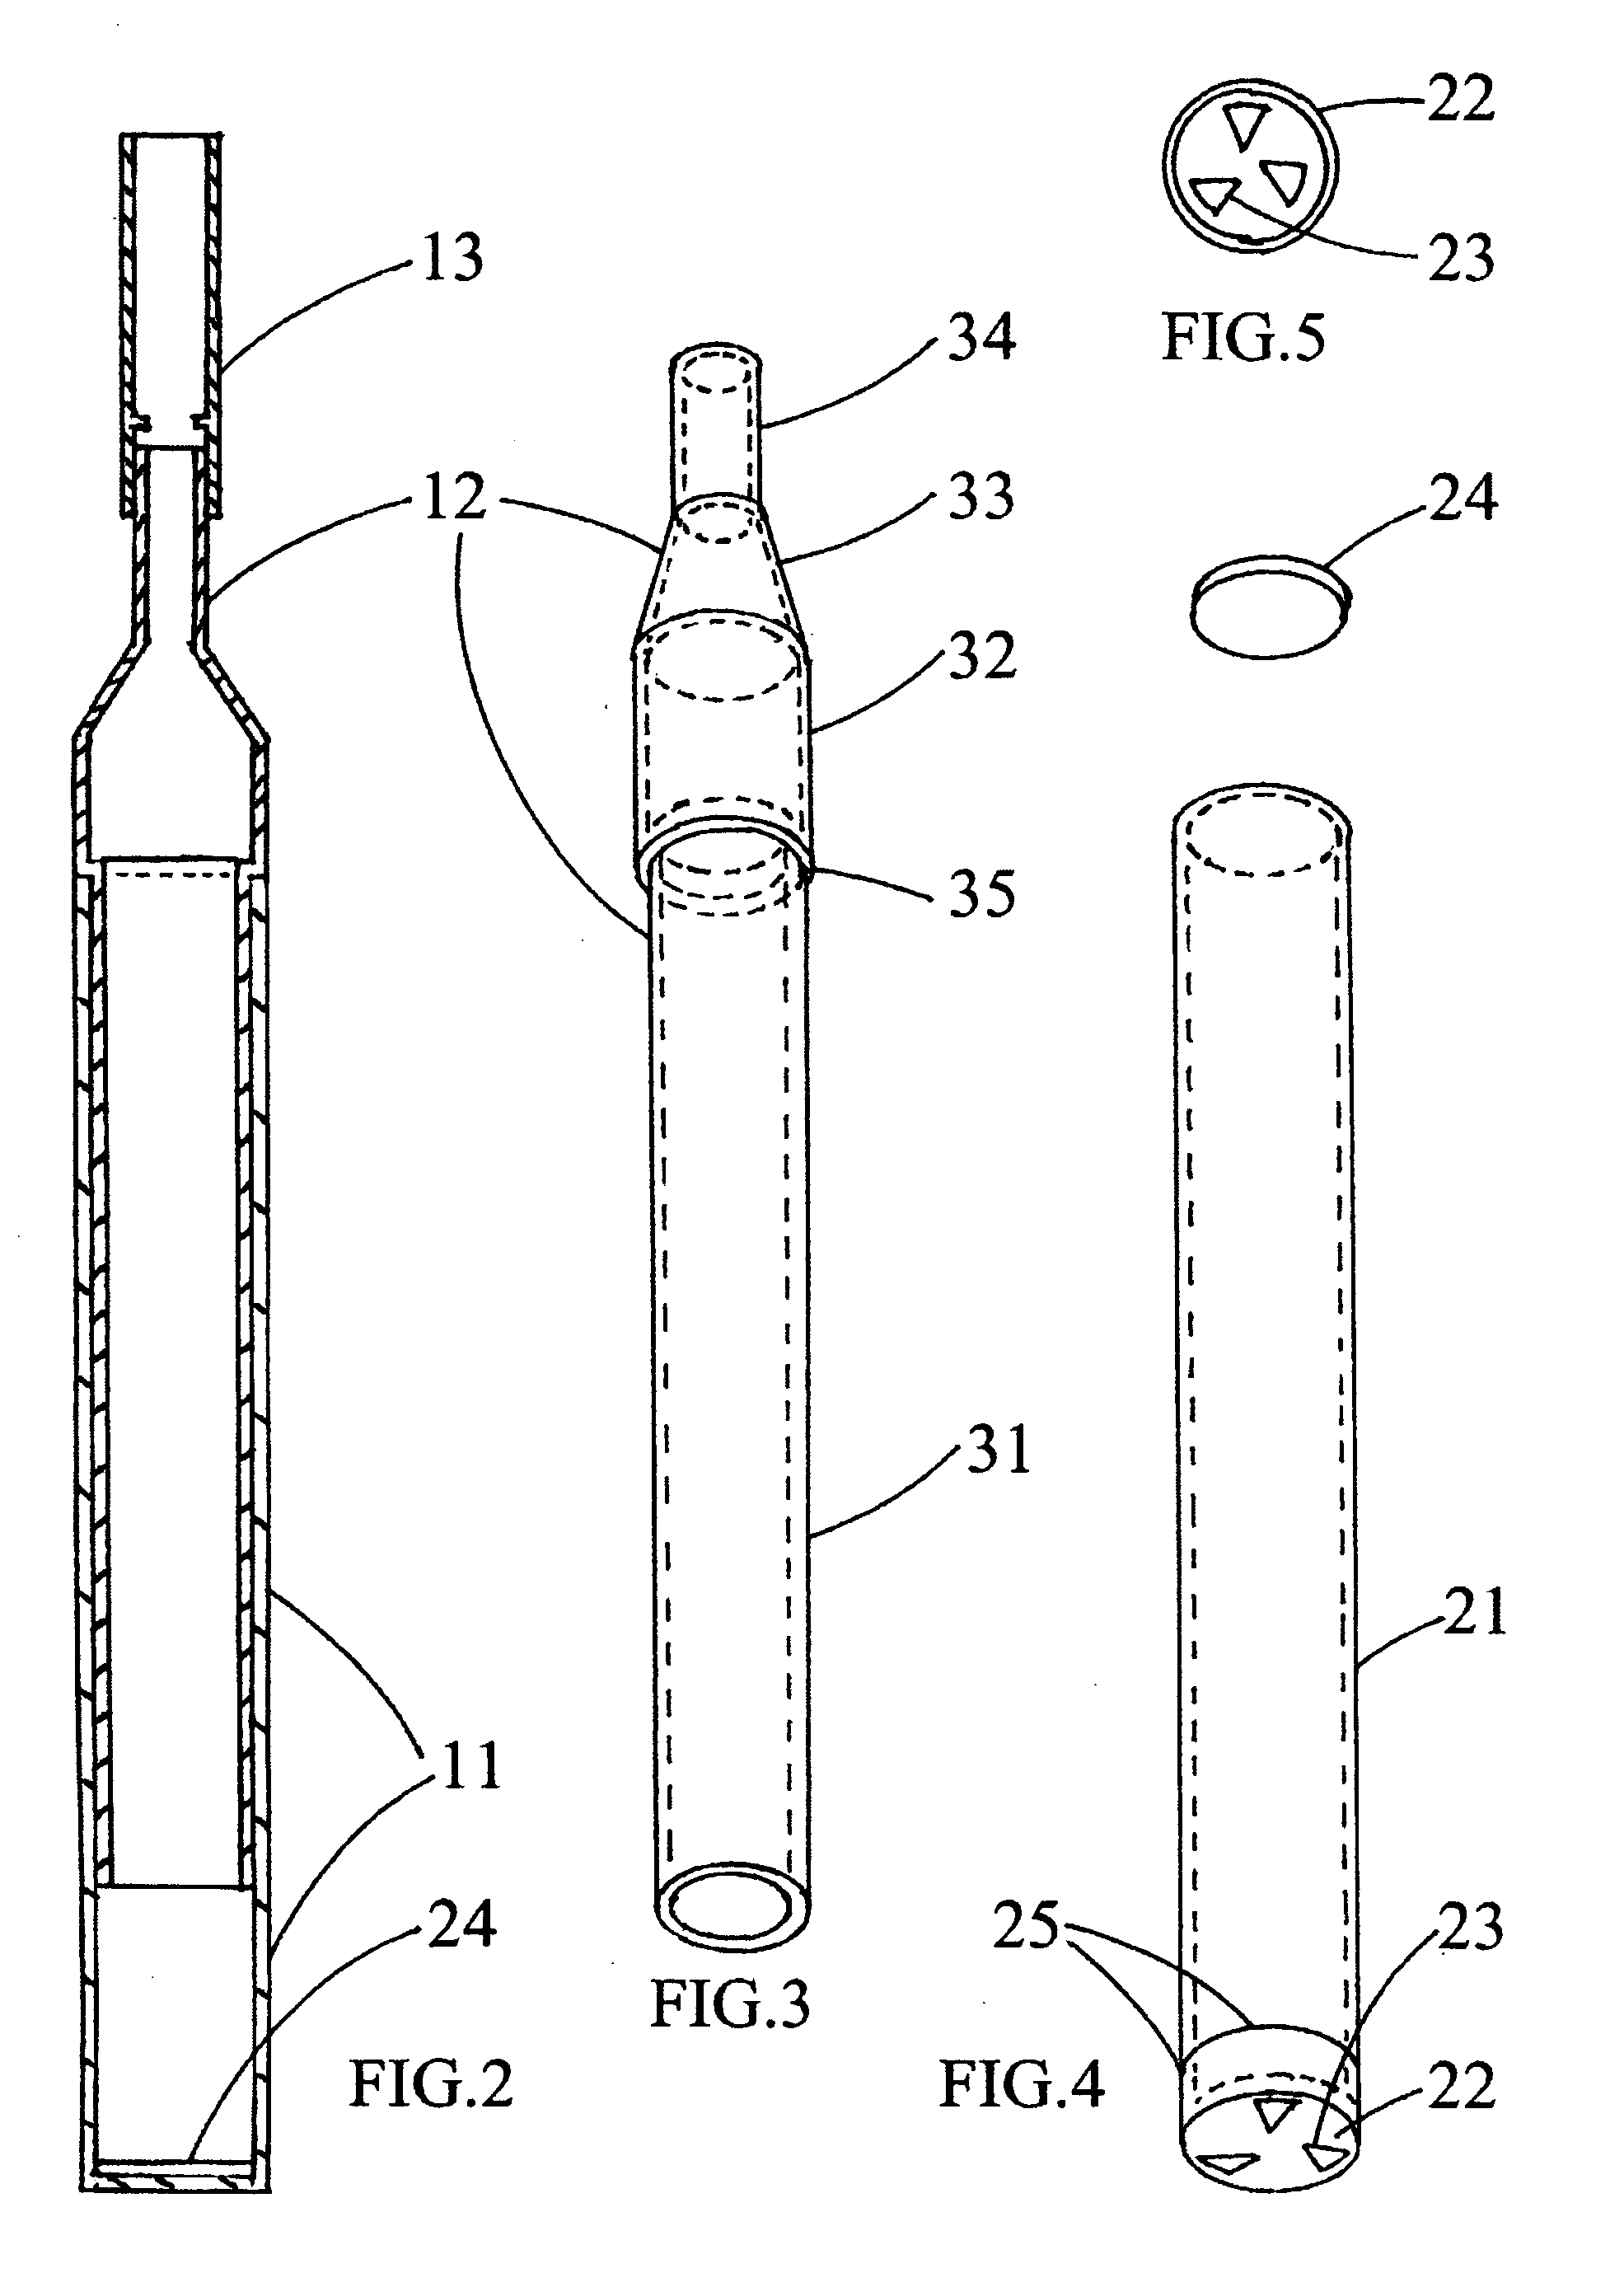 Launching device and disposable cartridge containing confetti, paper discs or fluid